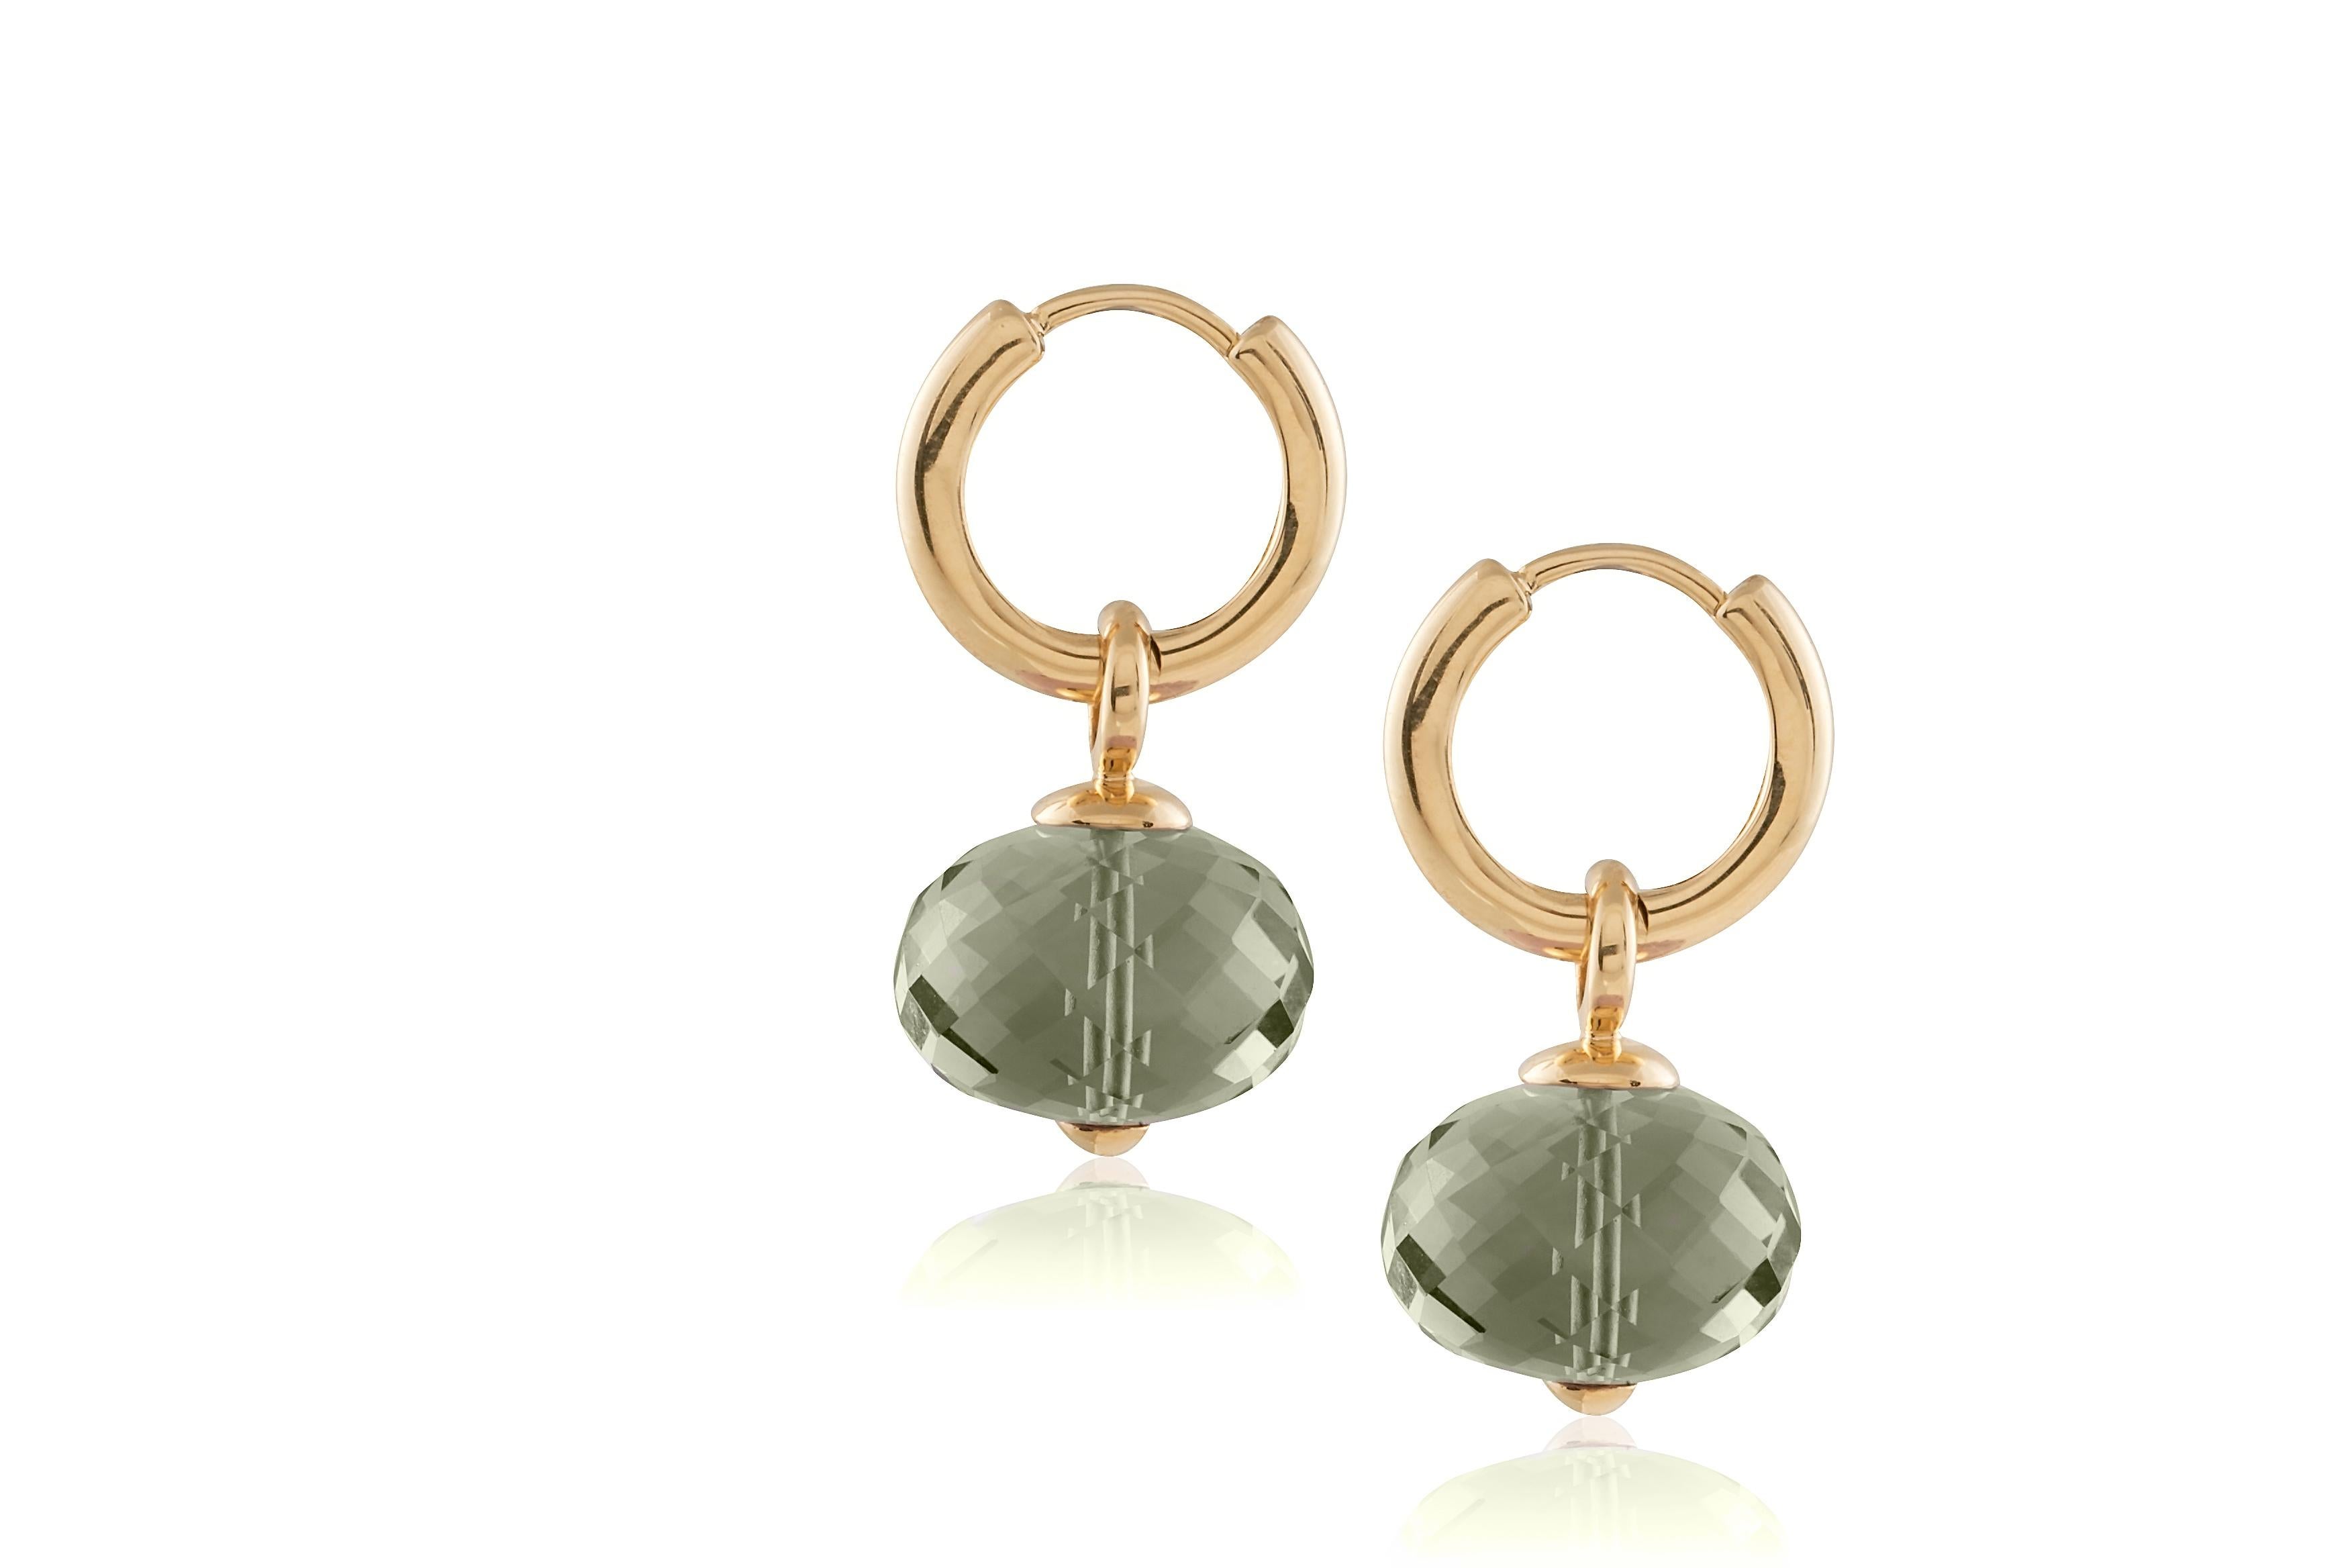 Introducing the epitome of elegance and sophistication: the Prasiolite Faceted Round Bead Double Loop Earrings from the exquisite 'Beyond' Collection. Crafted in lustrous 18K Yellow Gold, these stunning earrings feature mesmerizing Prasiolite beads